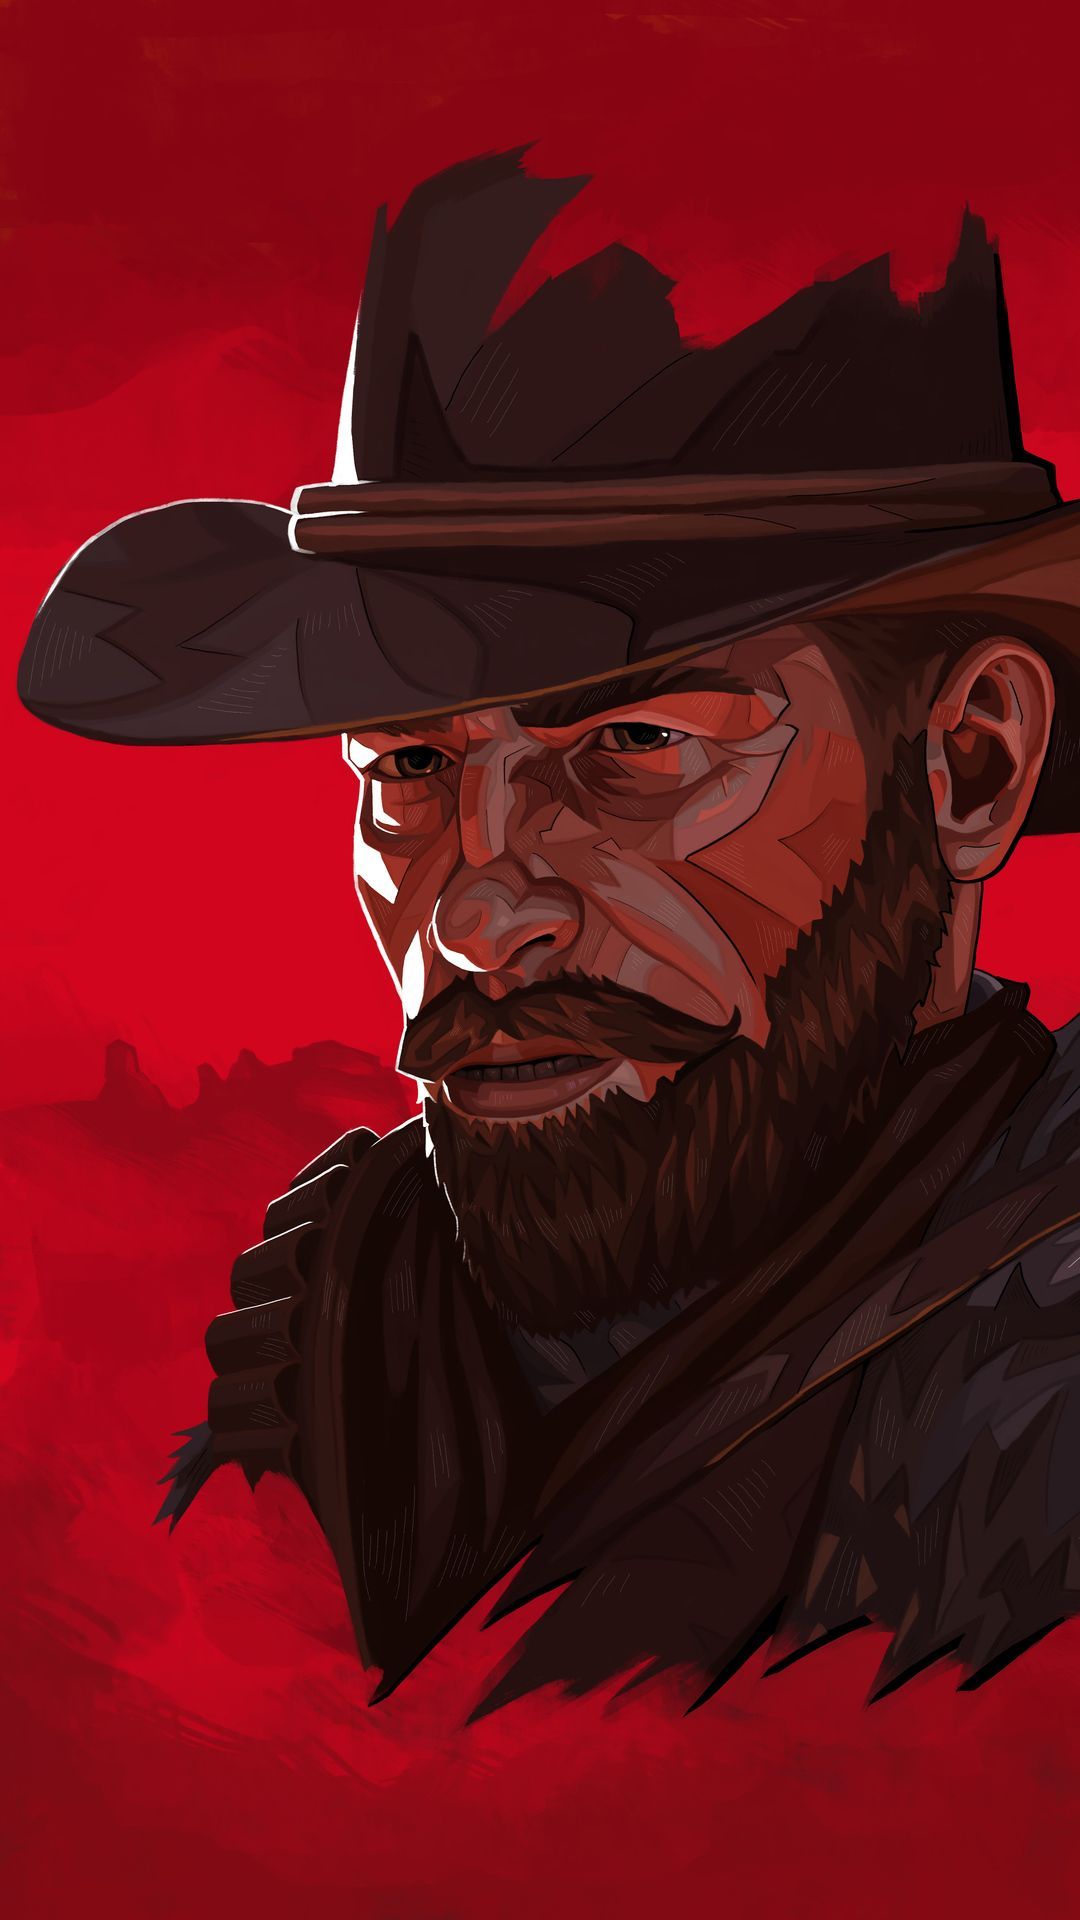 Arthur Morgan Red Dead Redemption 2 4k 2019 Mobile Wallpaper iPhone, Android, Samsung, Pixel. Red dead redemption, Dark art drawings, Mobile wallpaper